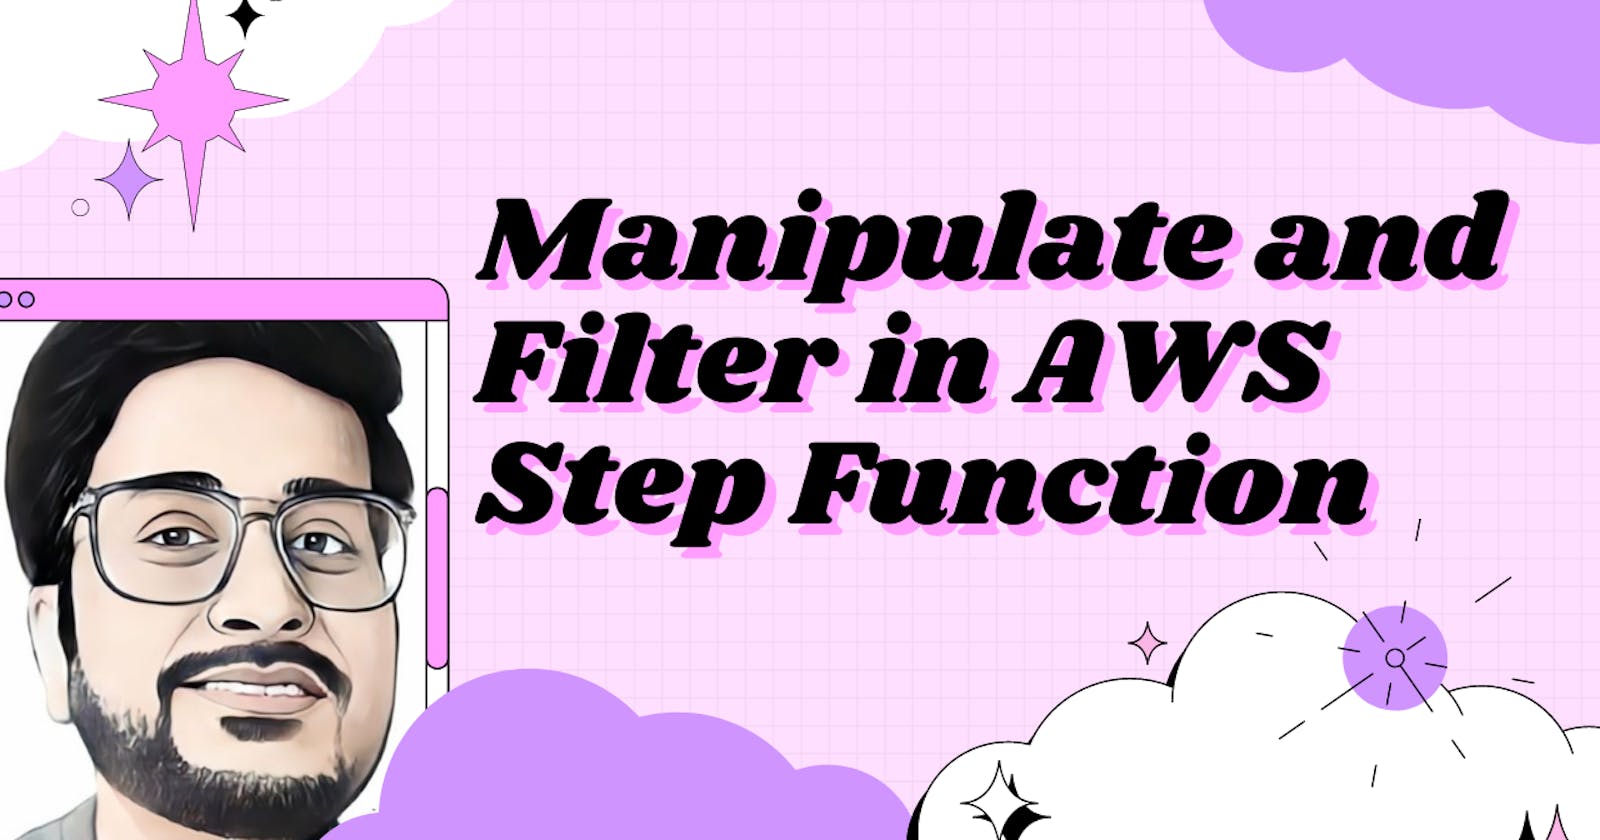 Manipulate and Filter in AWS Step Function